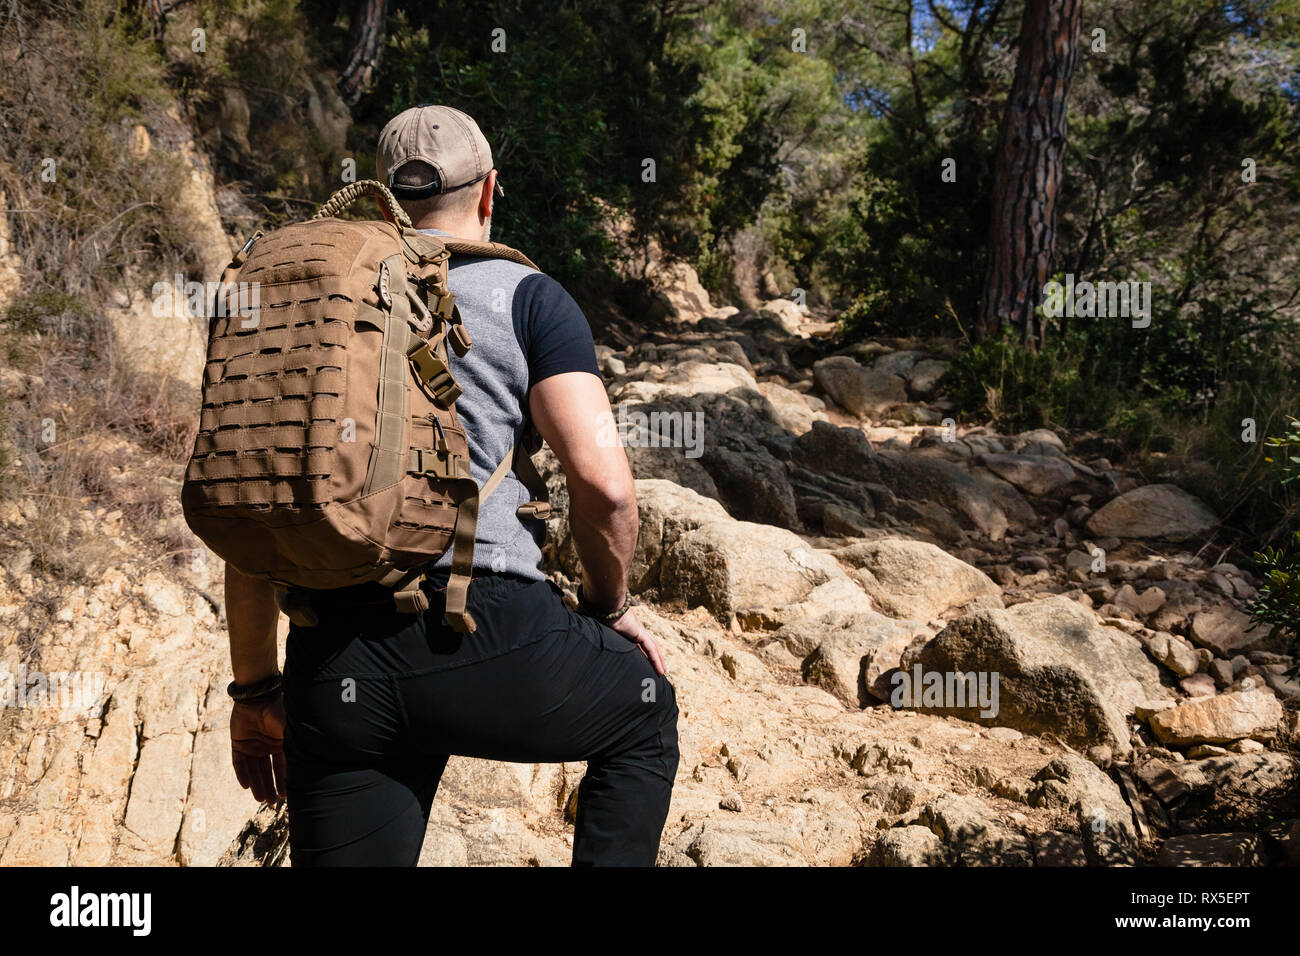 A man with backpack hiking on a path of rocks in a forest with sunlight, back view Stock Photo